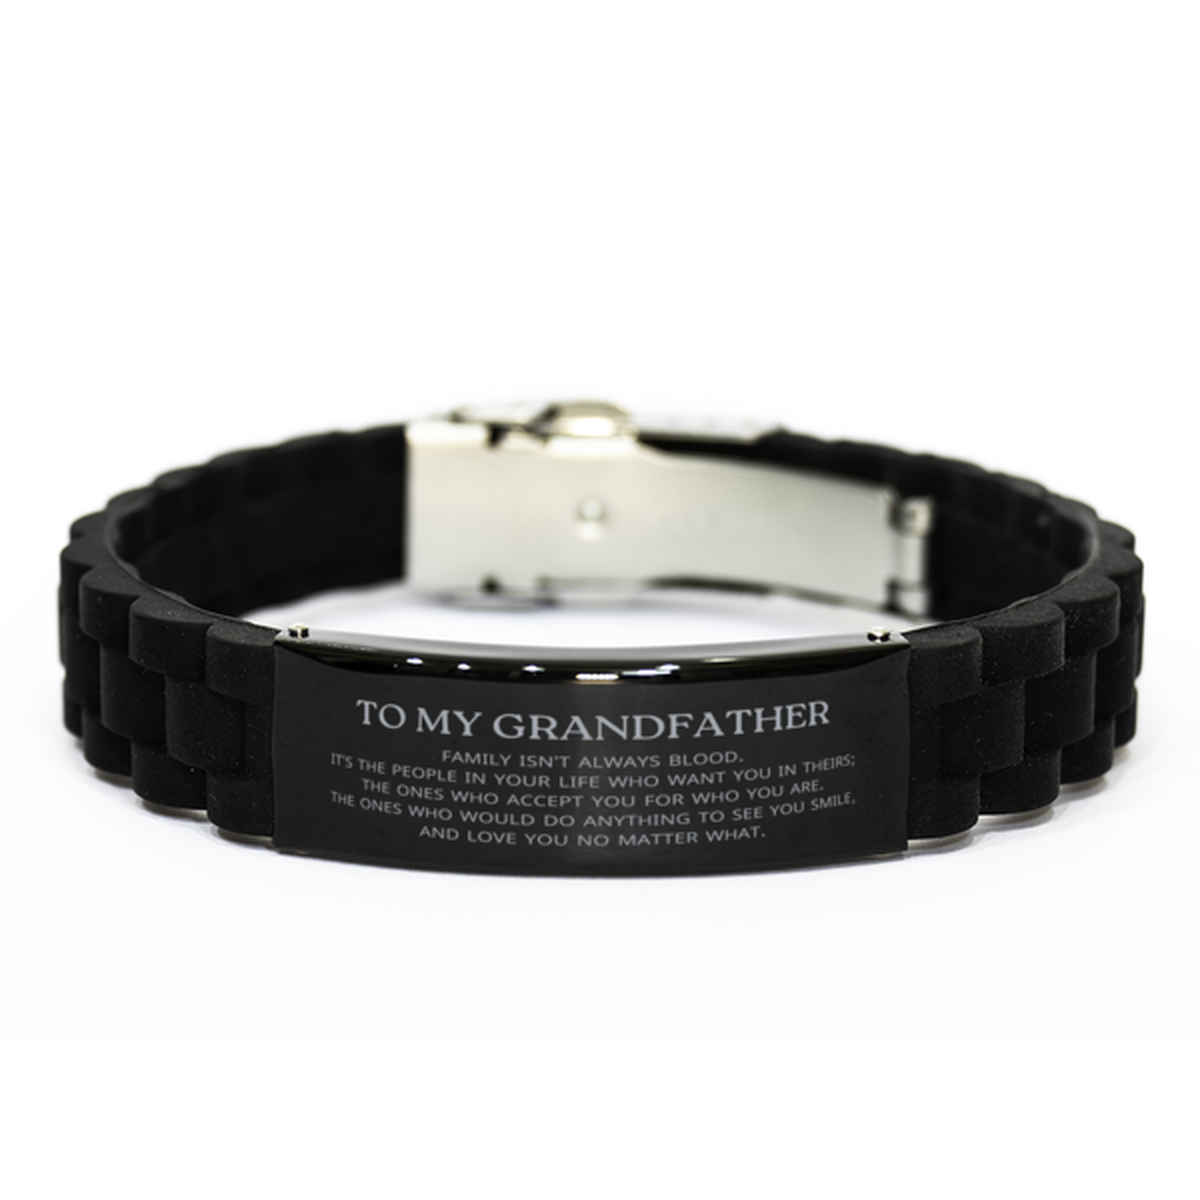 To My Grandfather Gifts, Family isn't always blood, Grandfather Black Glidelock Clasp Bracelet, Birthday Christmas Unique Present For Grandfather